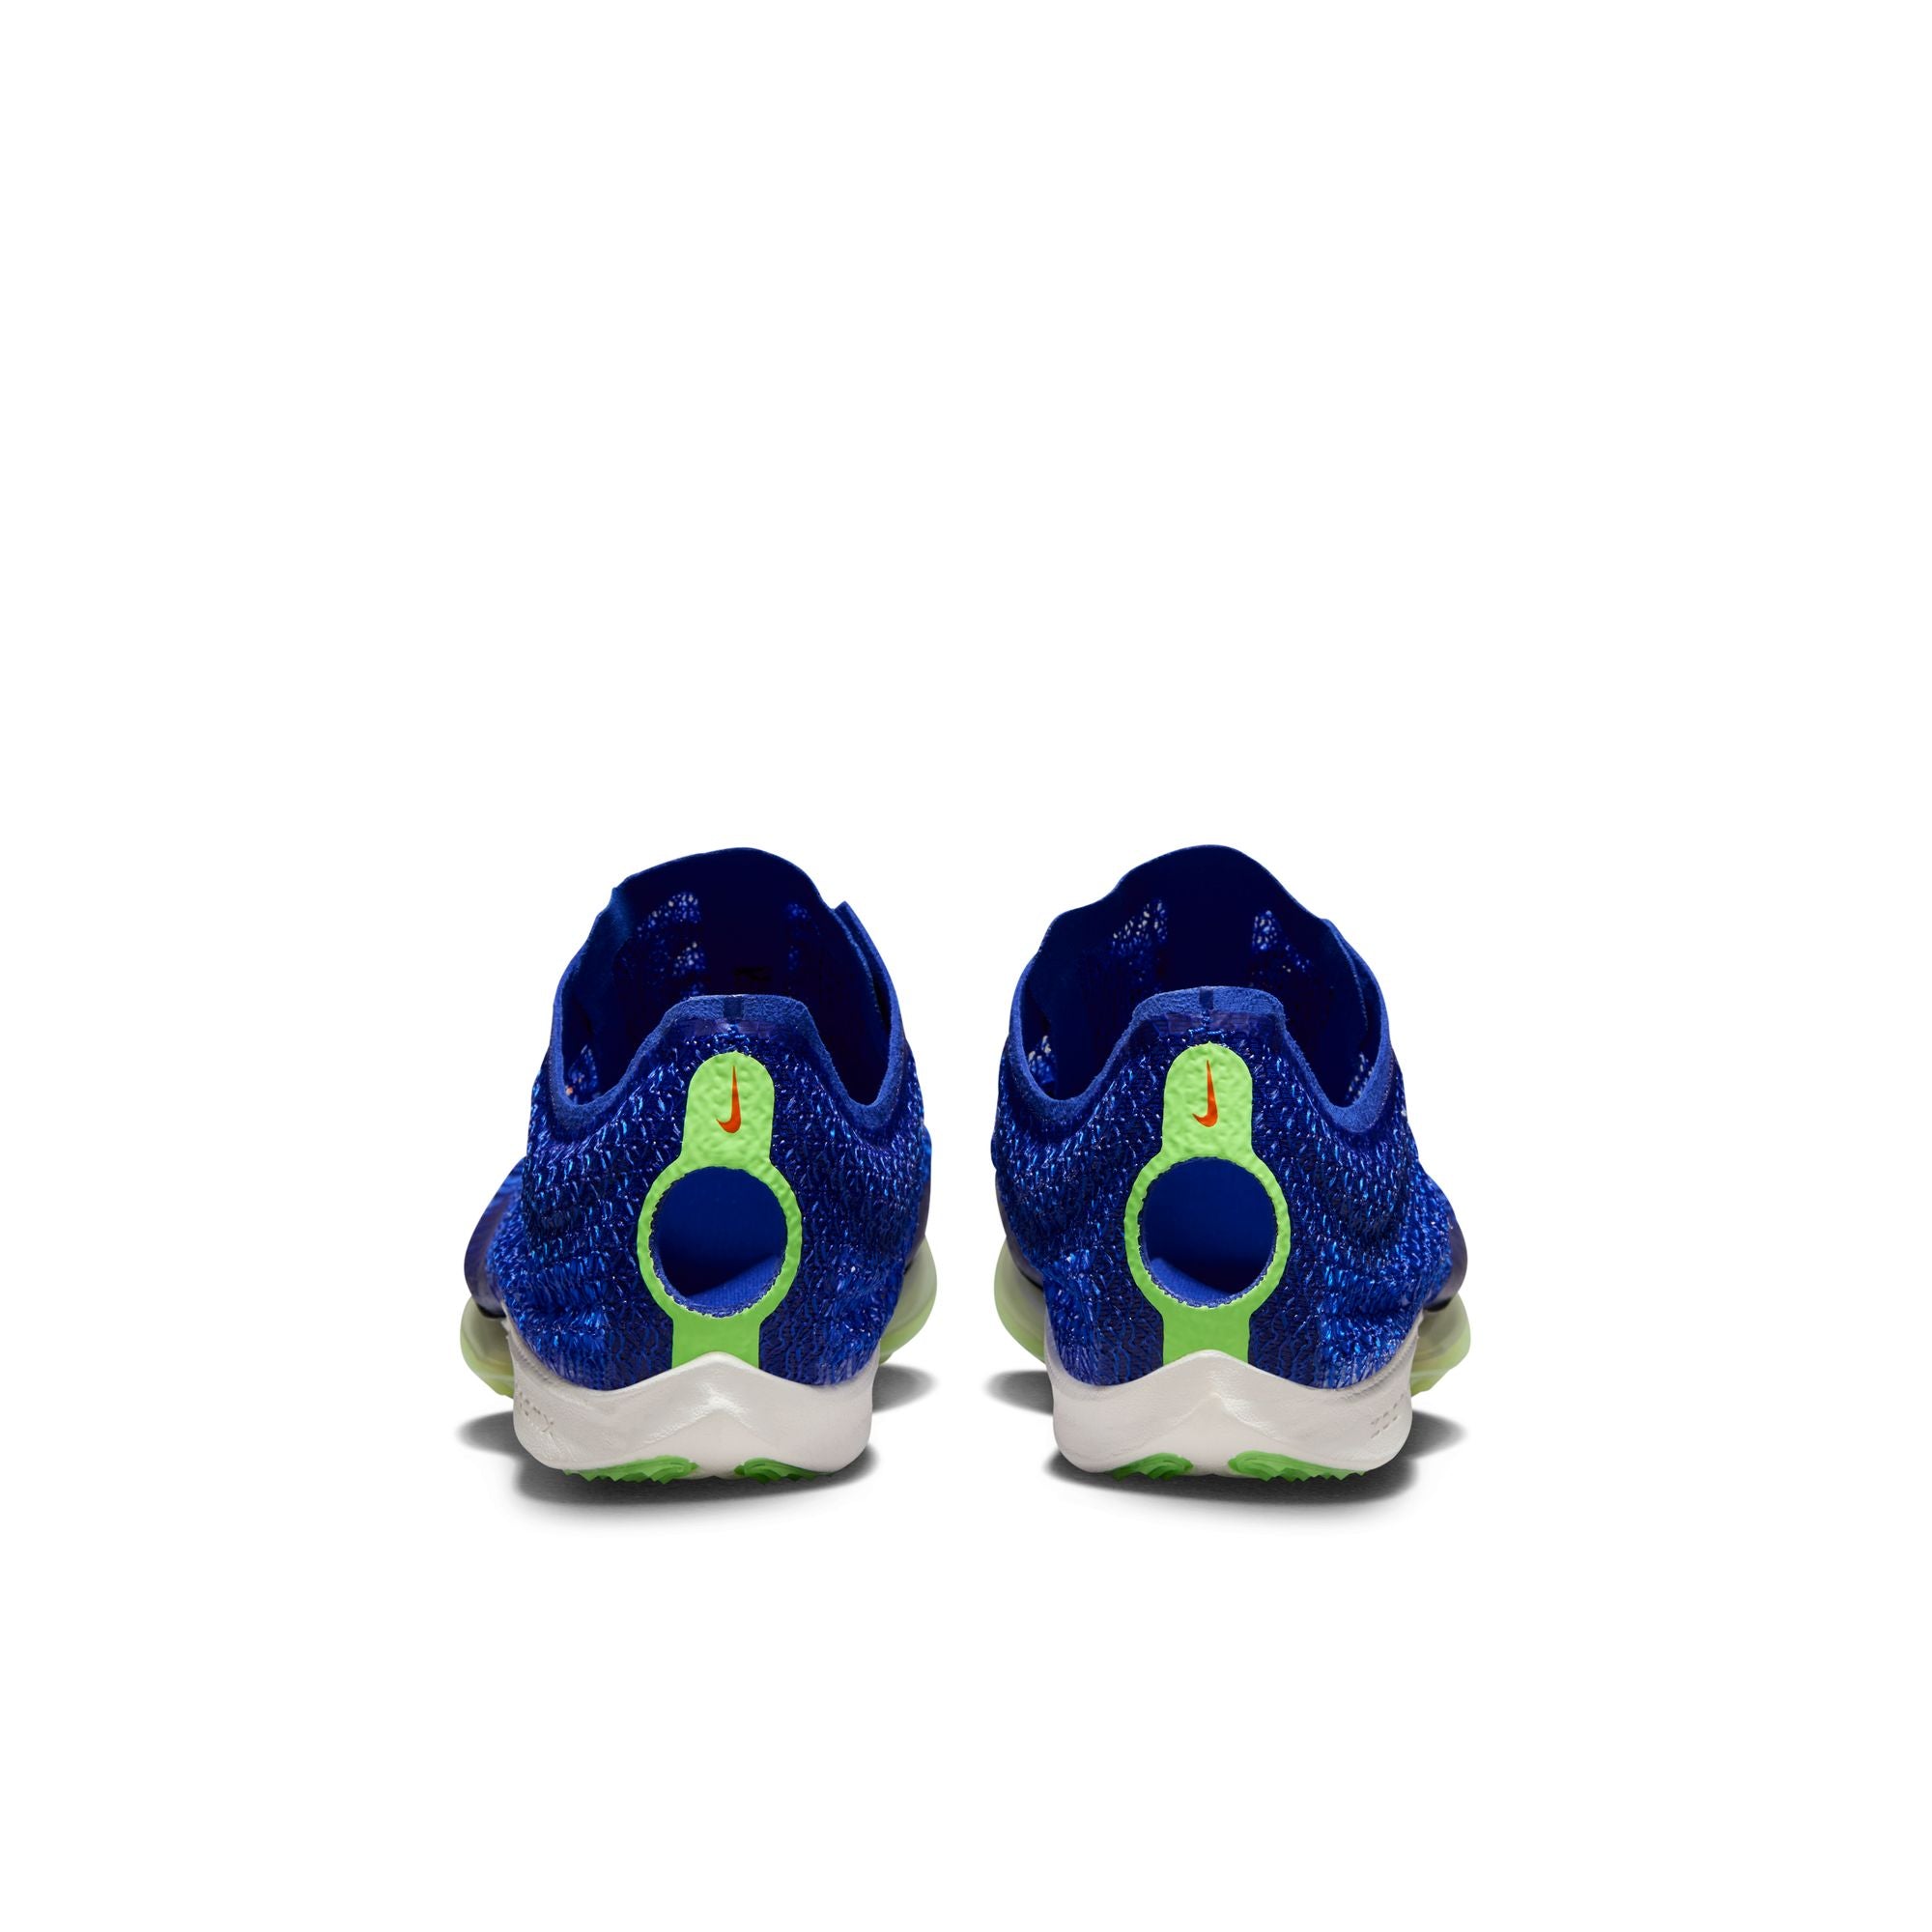 NIKE AIR ZOOM VICTORY - 400 RACER BLUE/WHITE-SAFETY ORANGE 